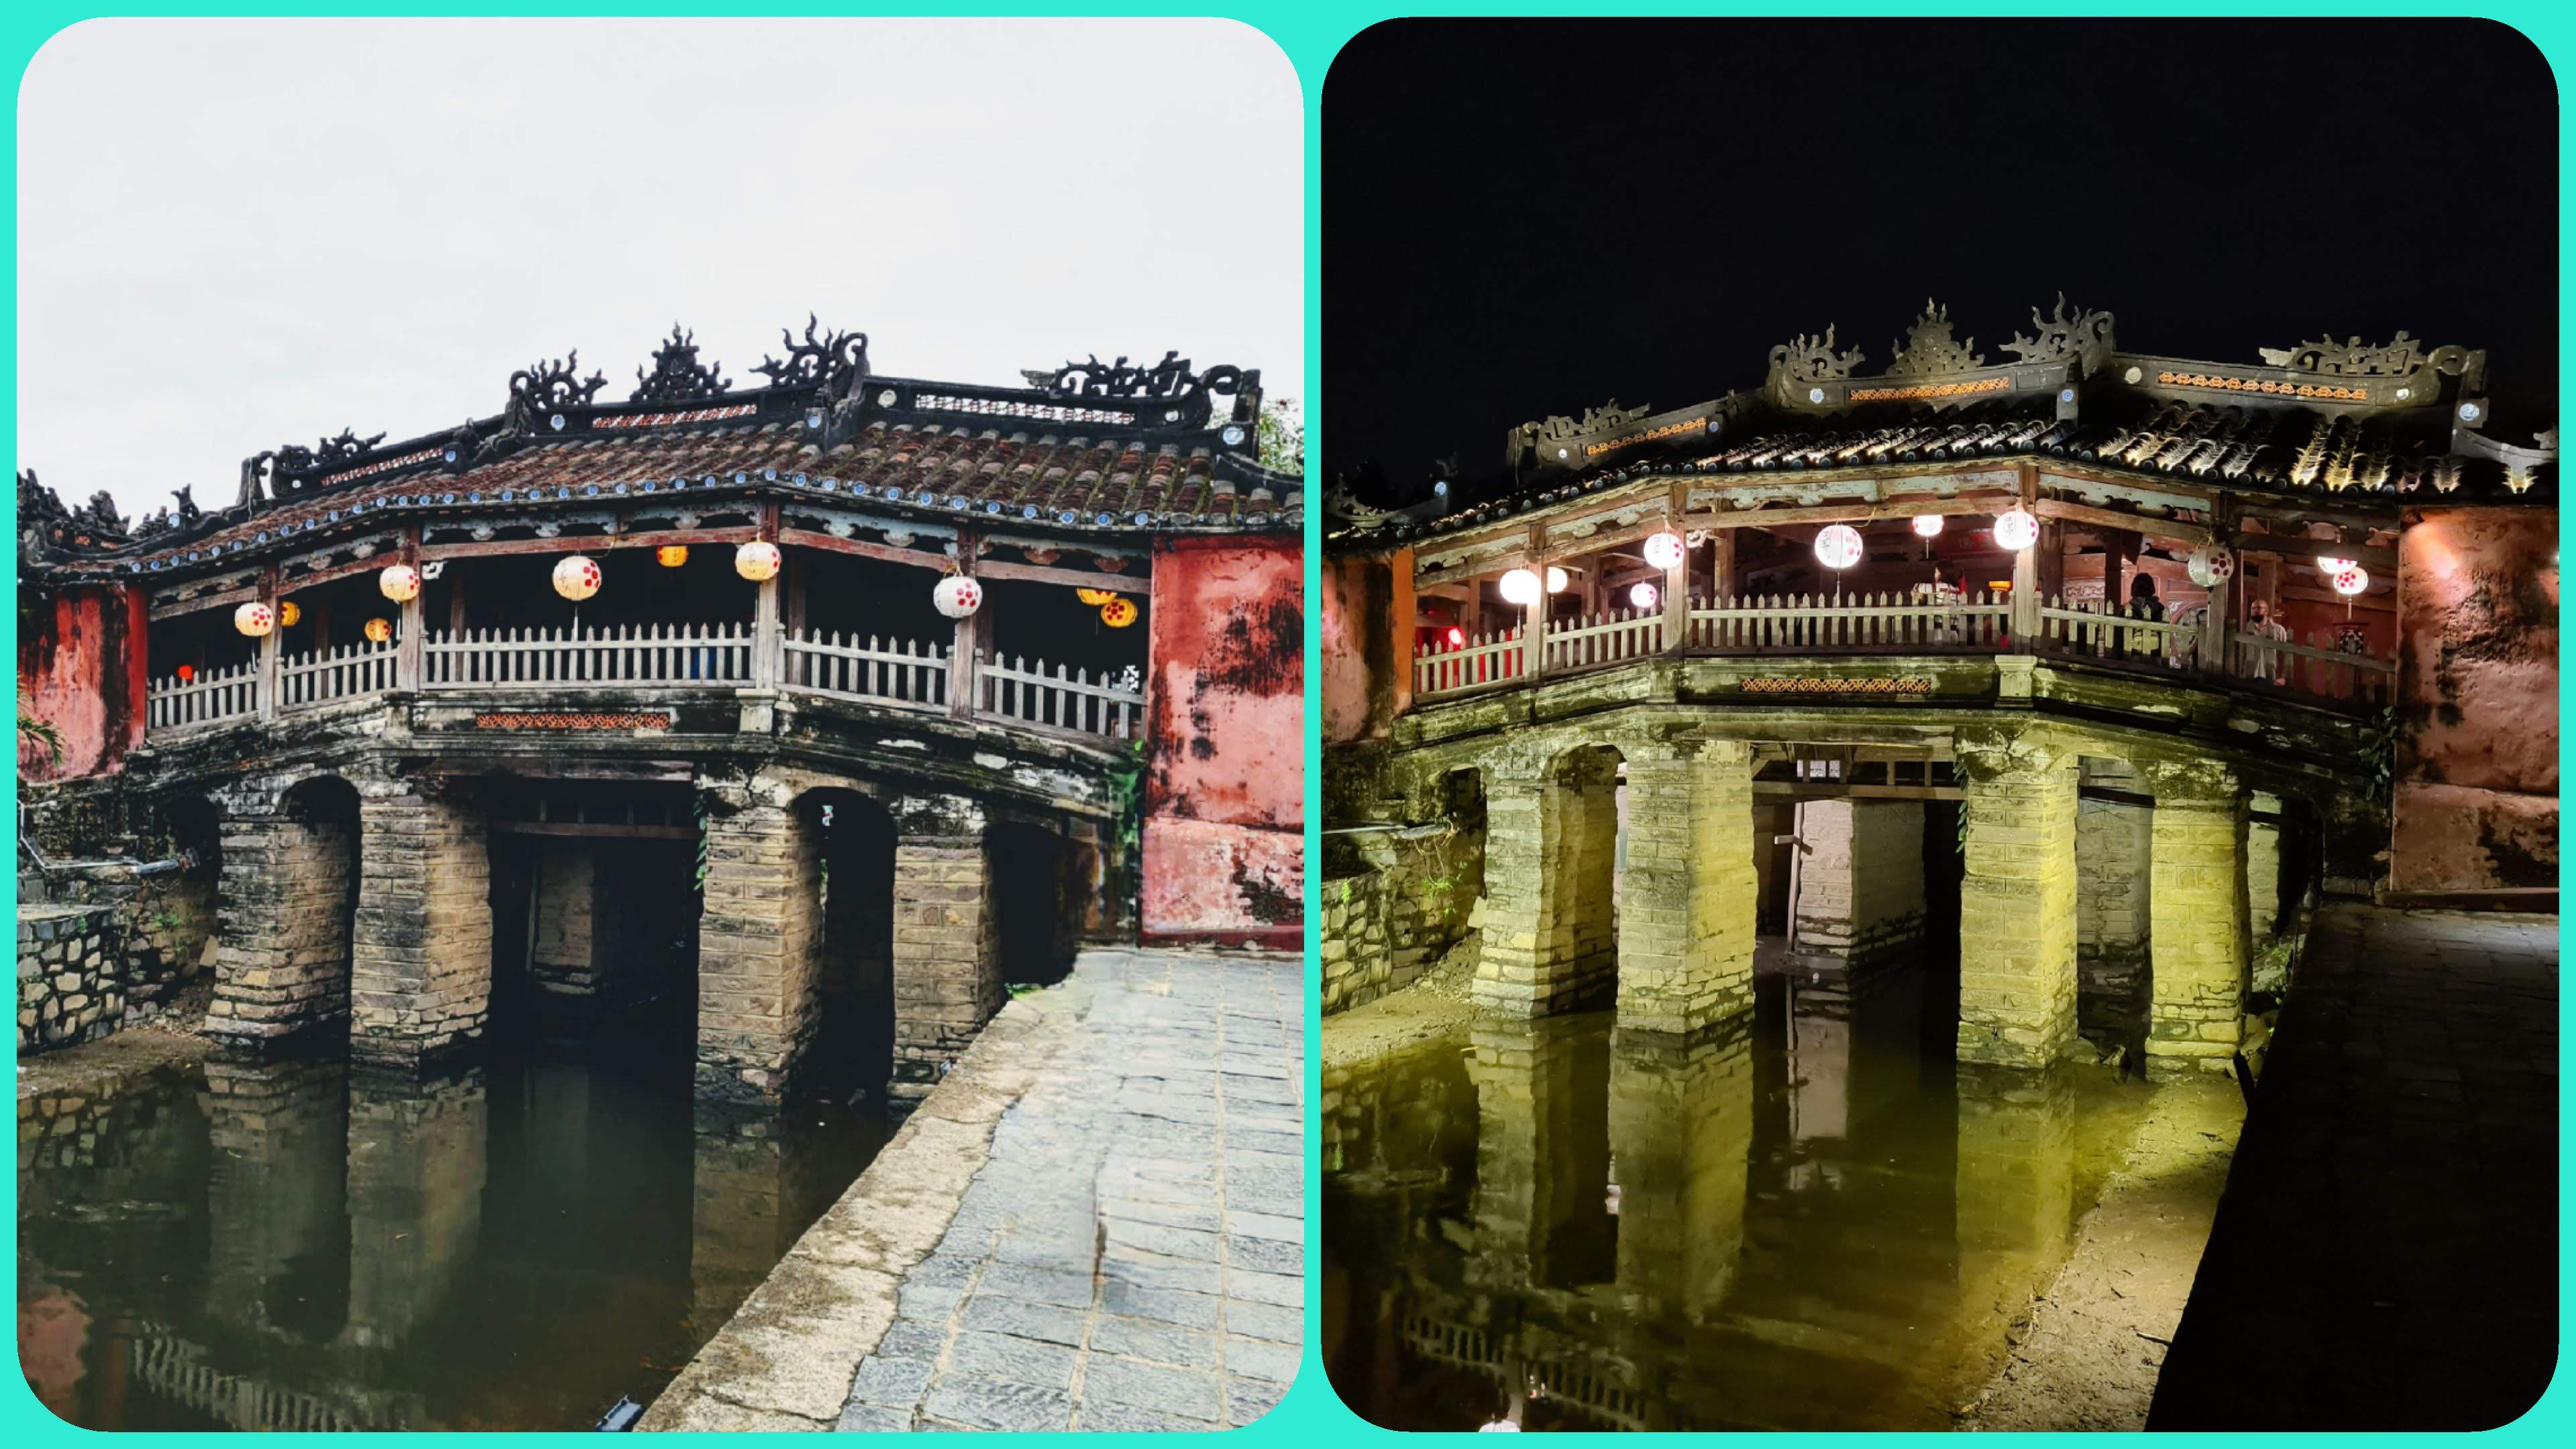 The Chua Cau (Japanese Covered Bridge) in the afternoon and evening in Hoi An Ancient Town, Quang Nam Province, Vietnam. Photo taken on April 3, 2022. Photo: Duy Khang / Tuoi Tre